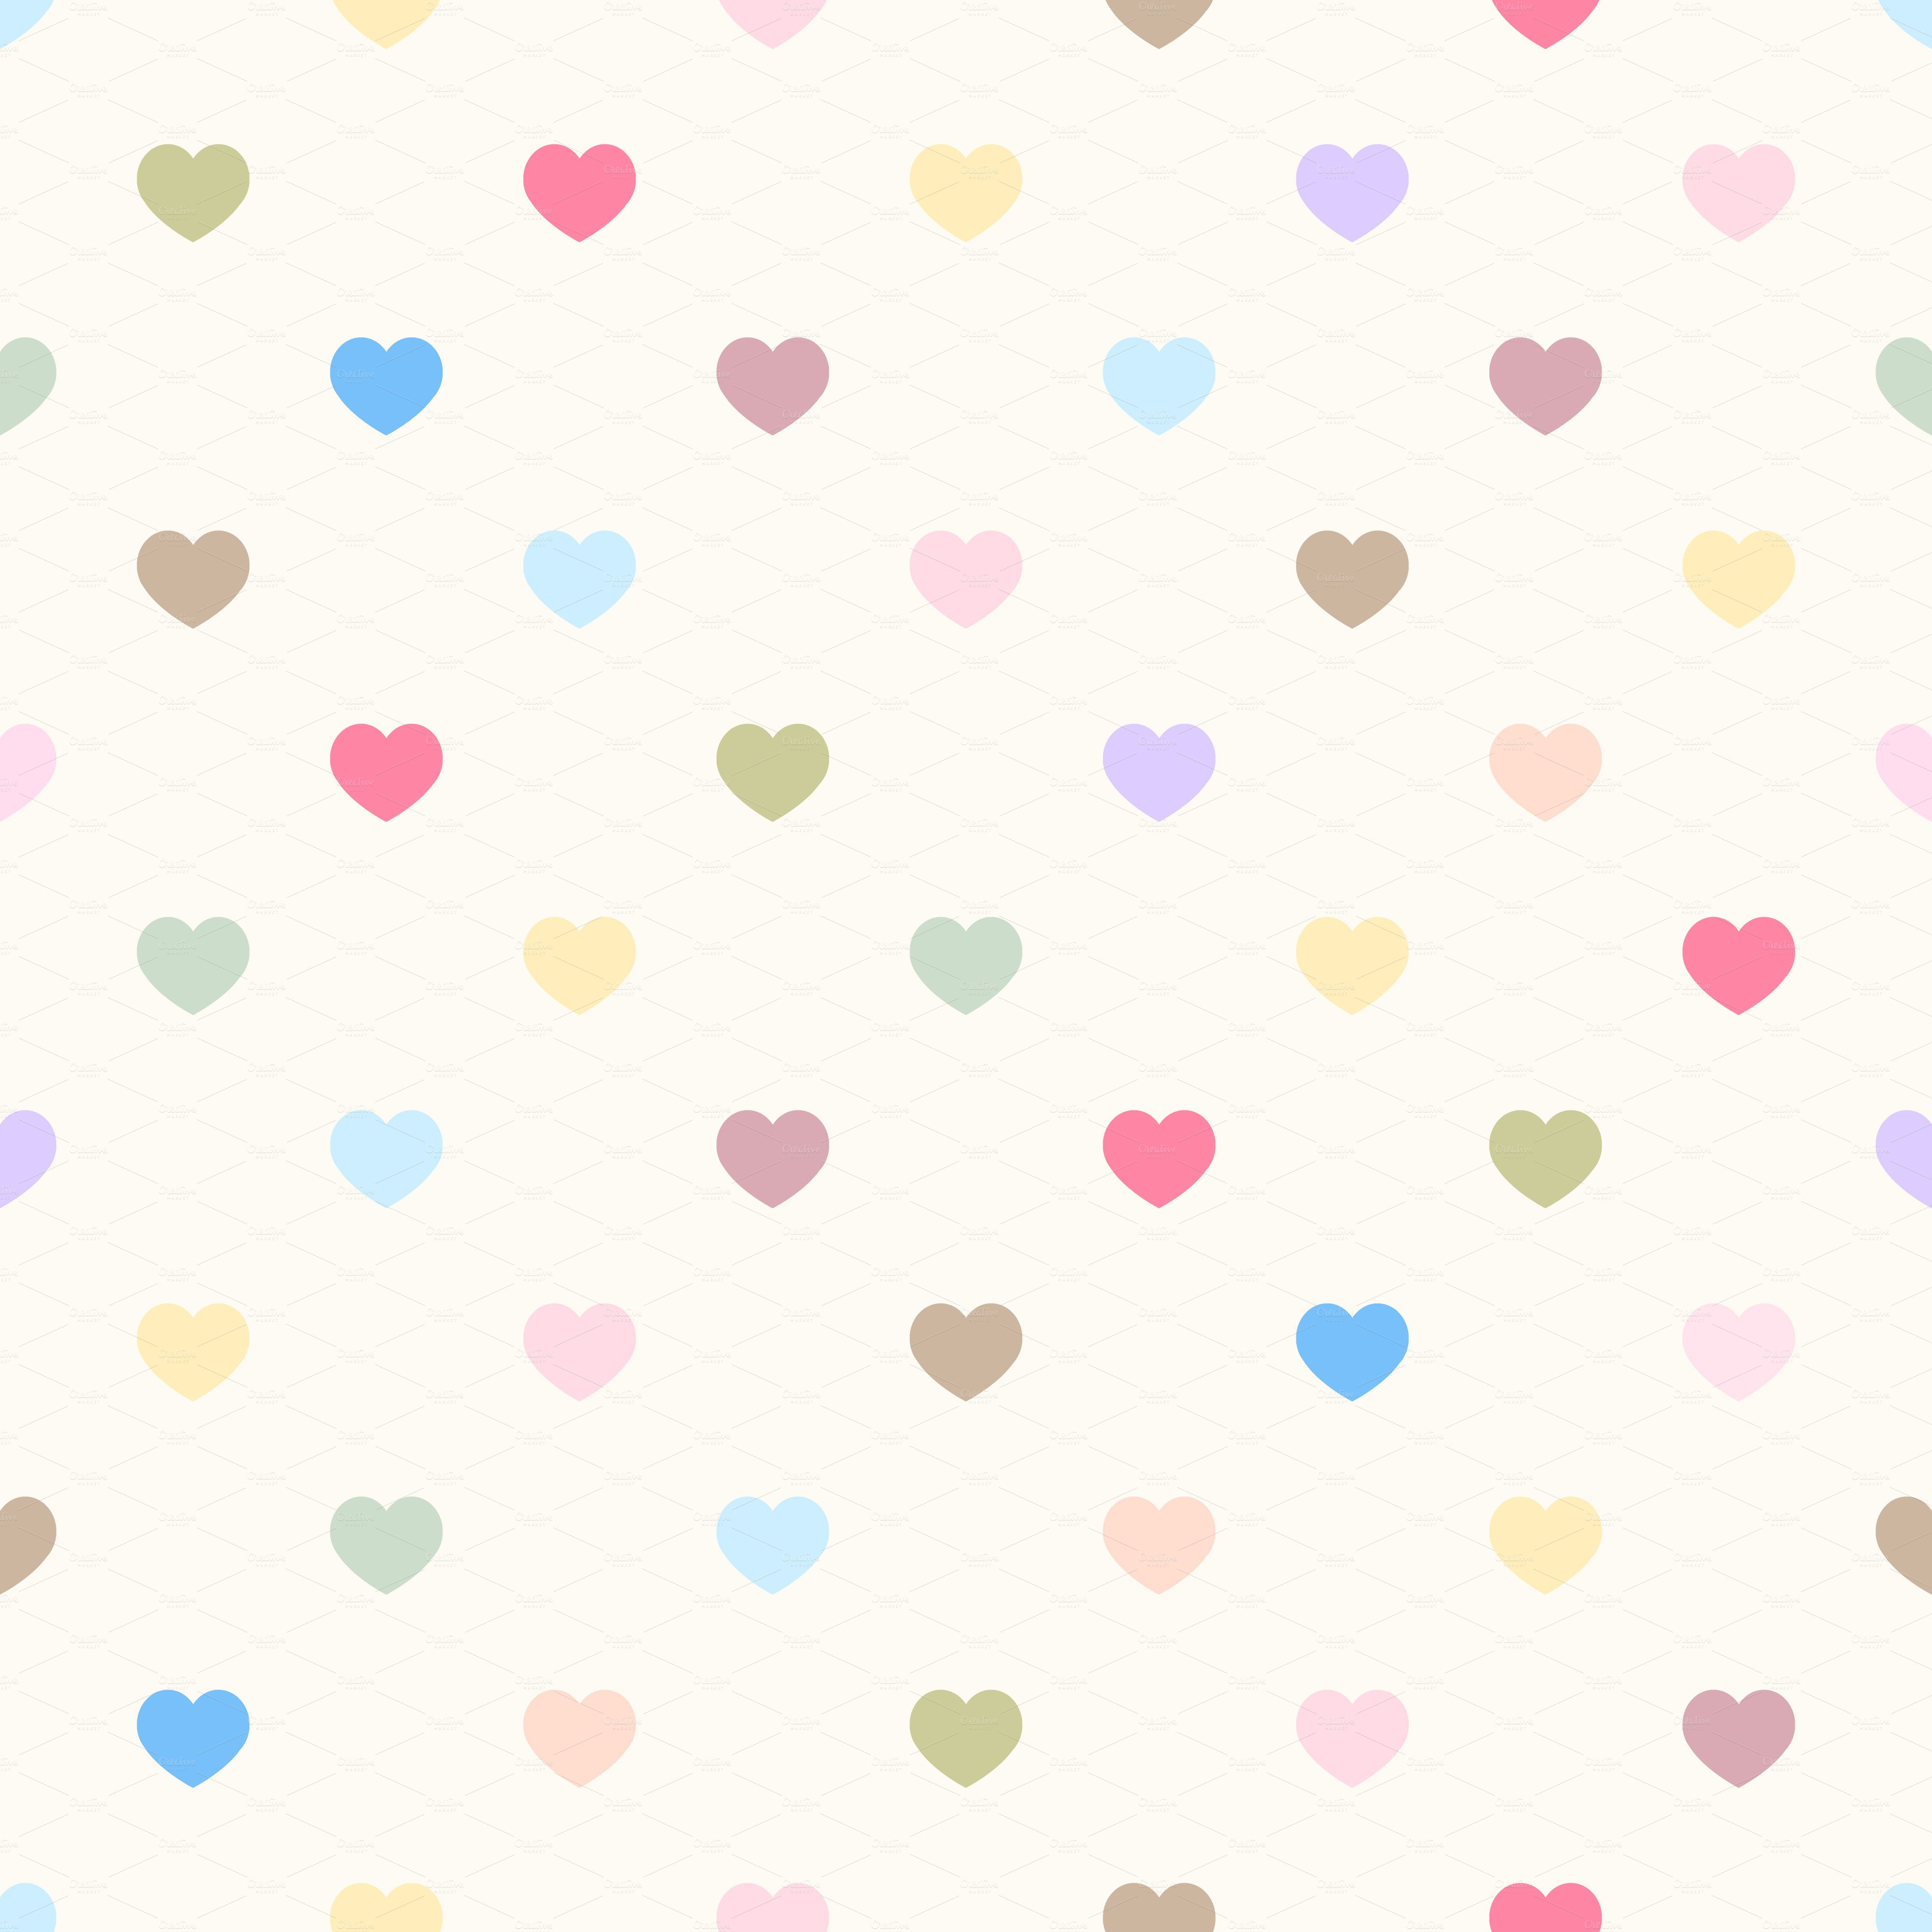 Cute Heart Tumblr Background. Pink